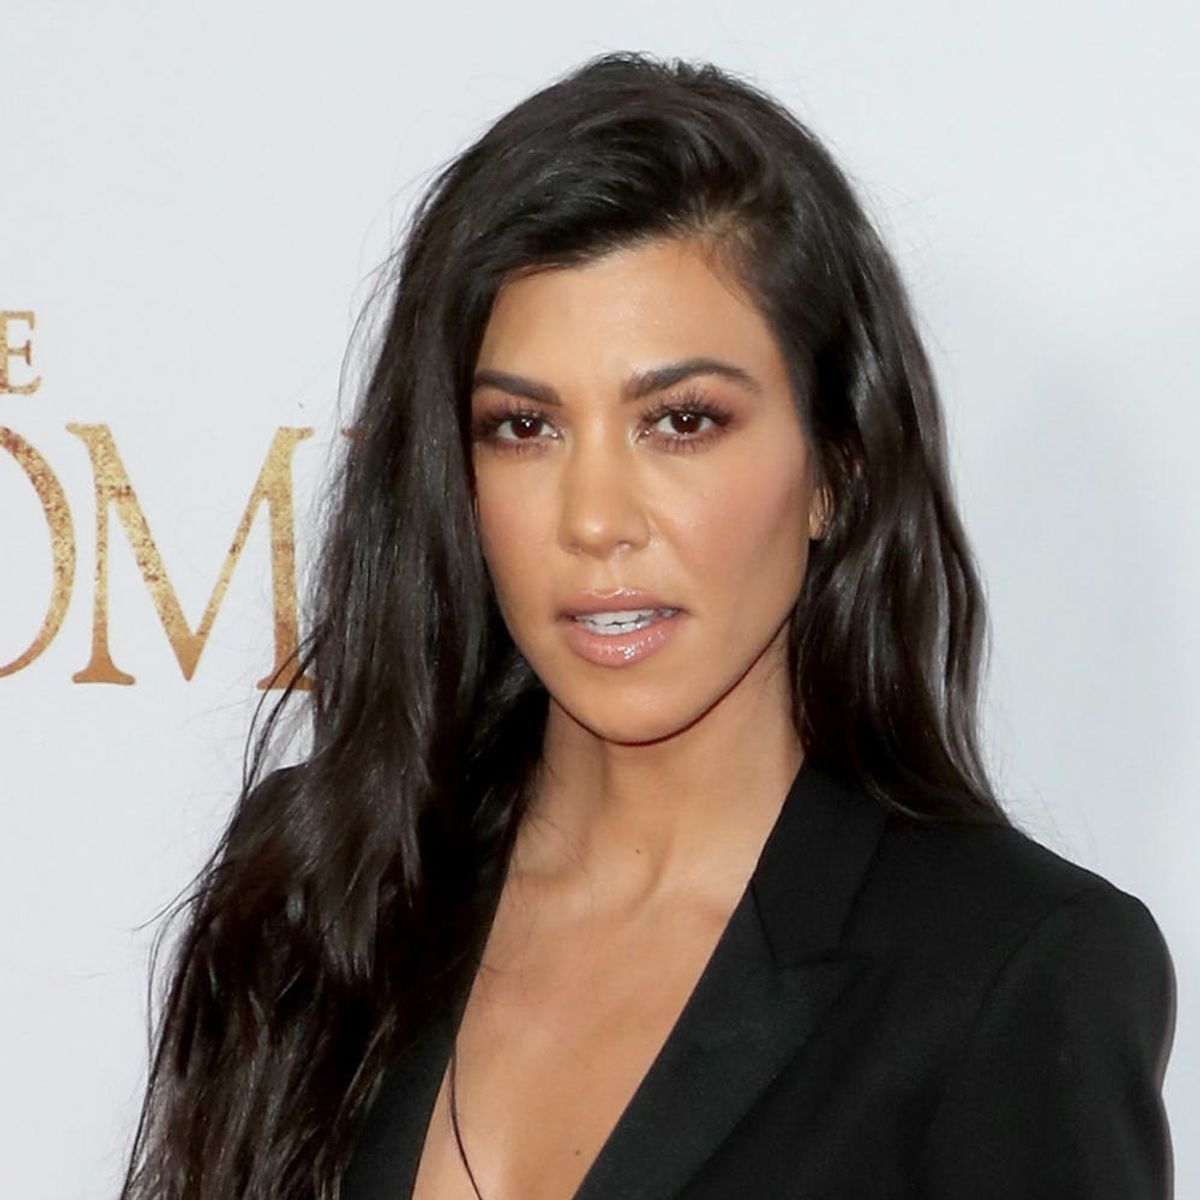 Keeping Up With the Kardashians Recap: Kourtney’s Fighting Fires